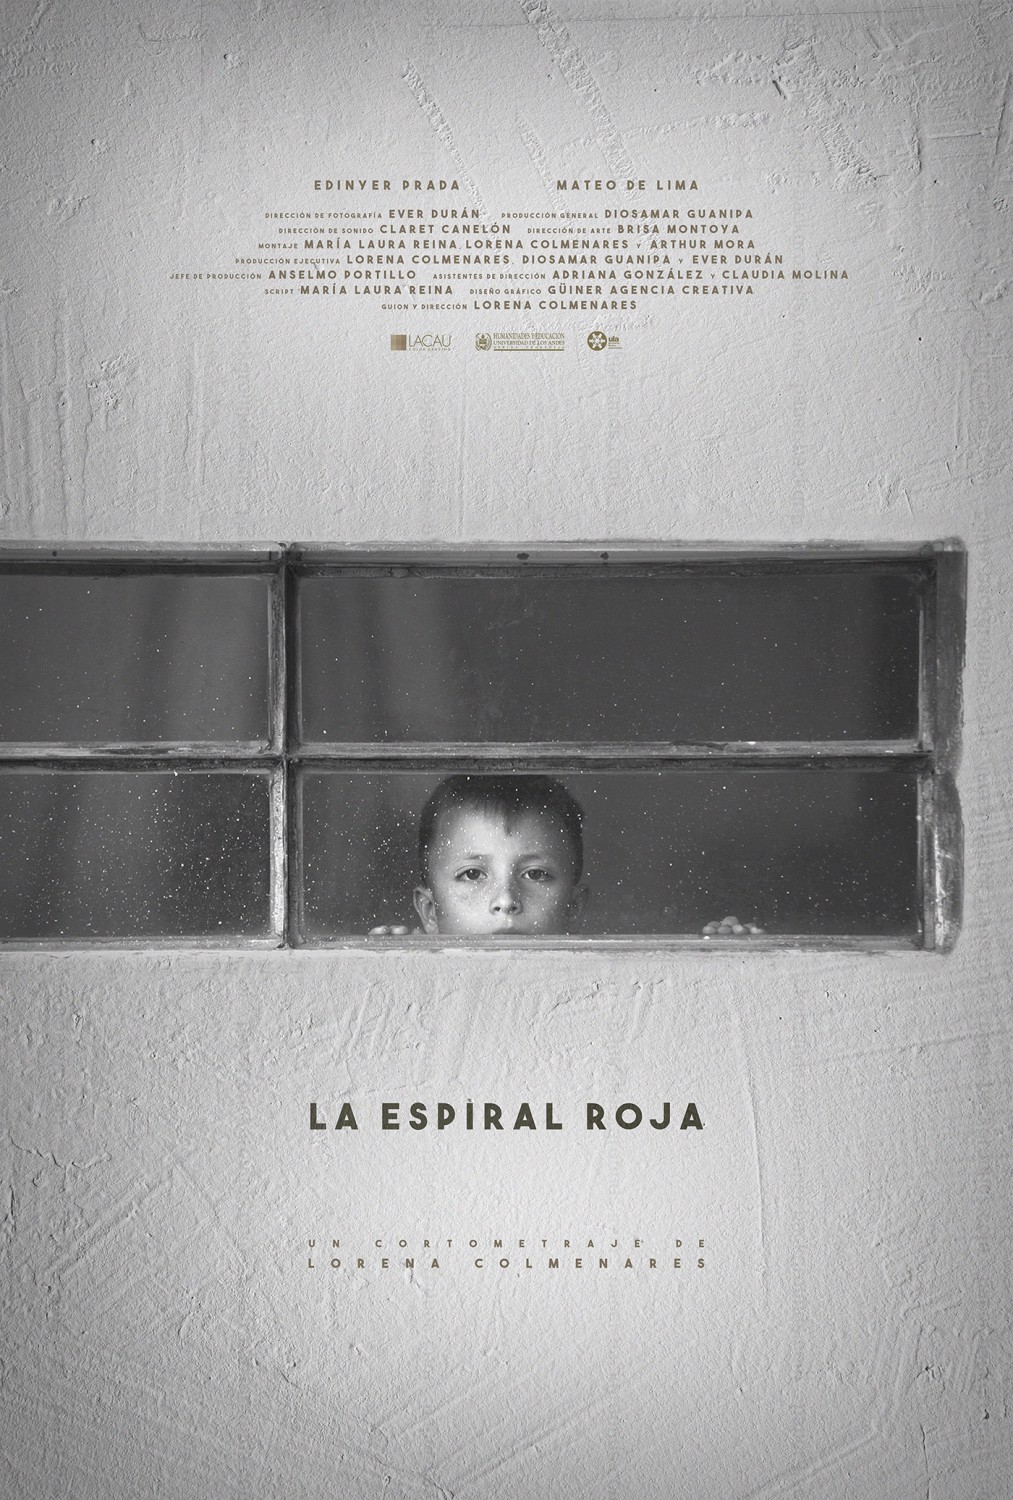 Extra Large Movie Poster Image for La espiral roja